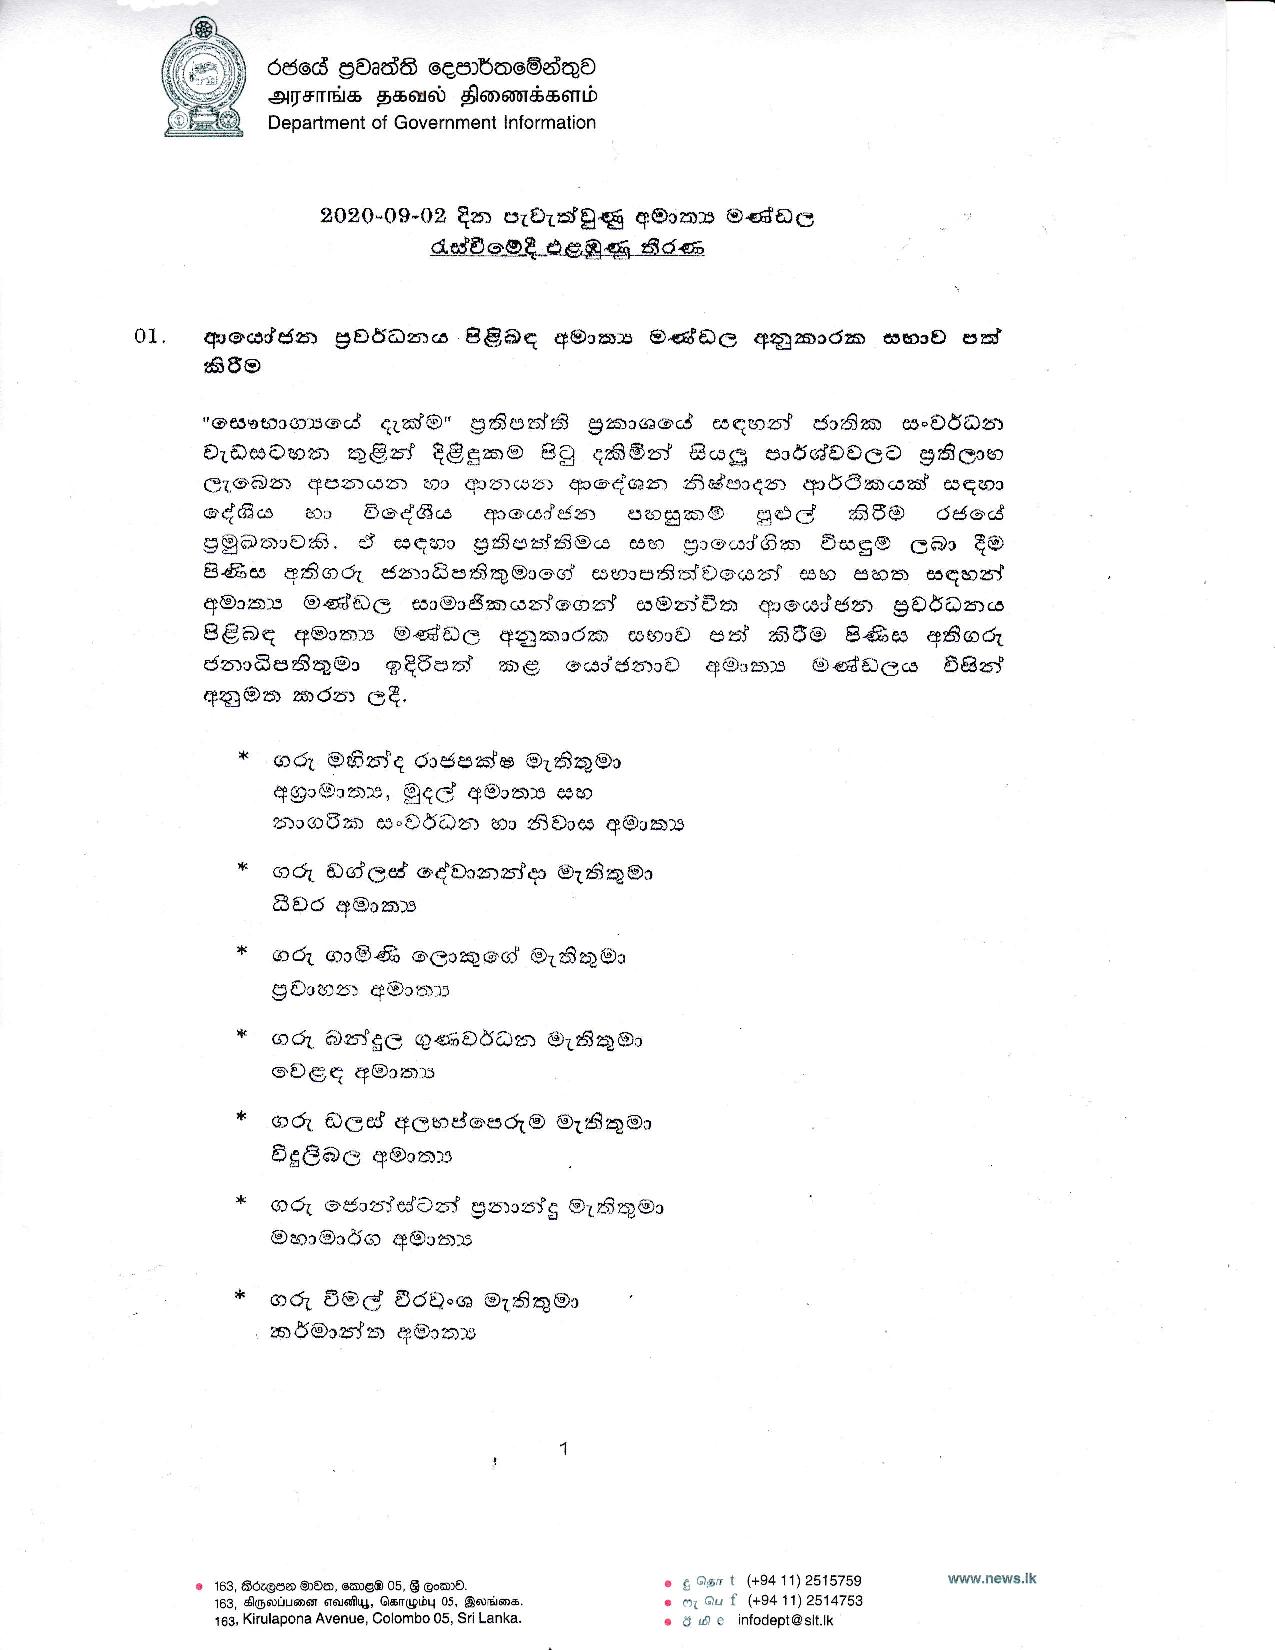 Cabinet Decision on 02.09.2020 Sinhala page 001